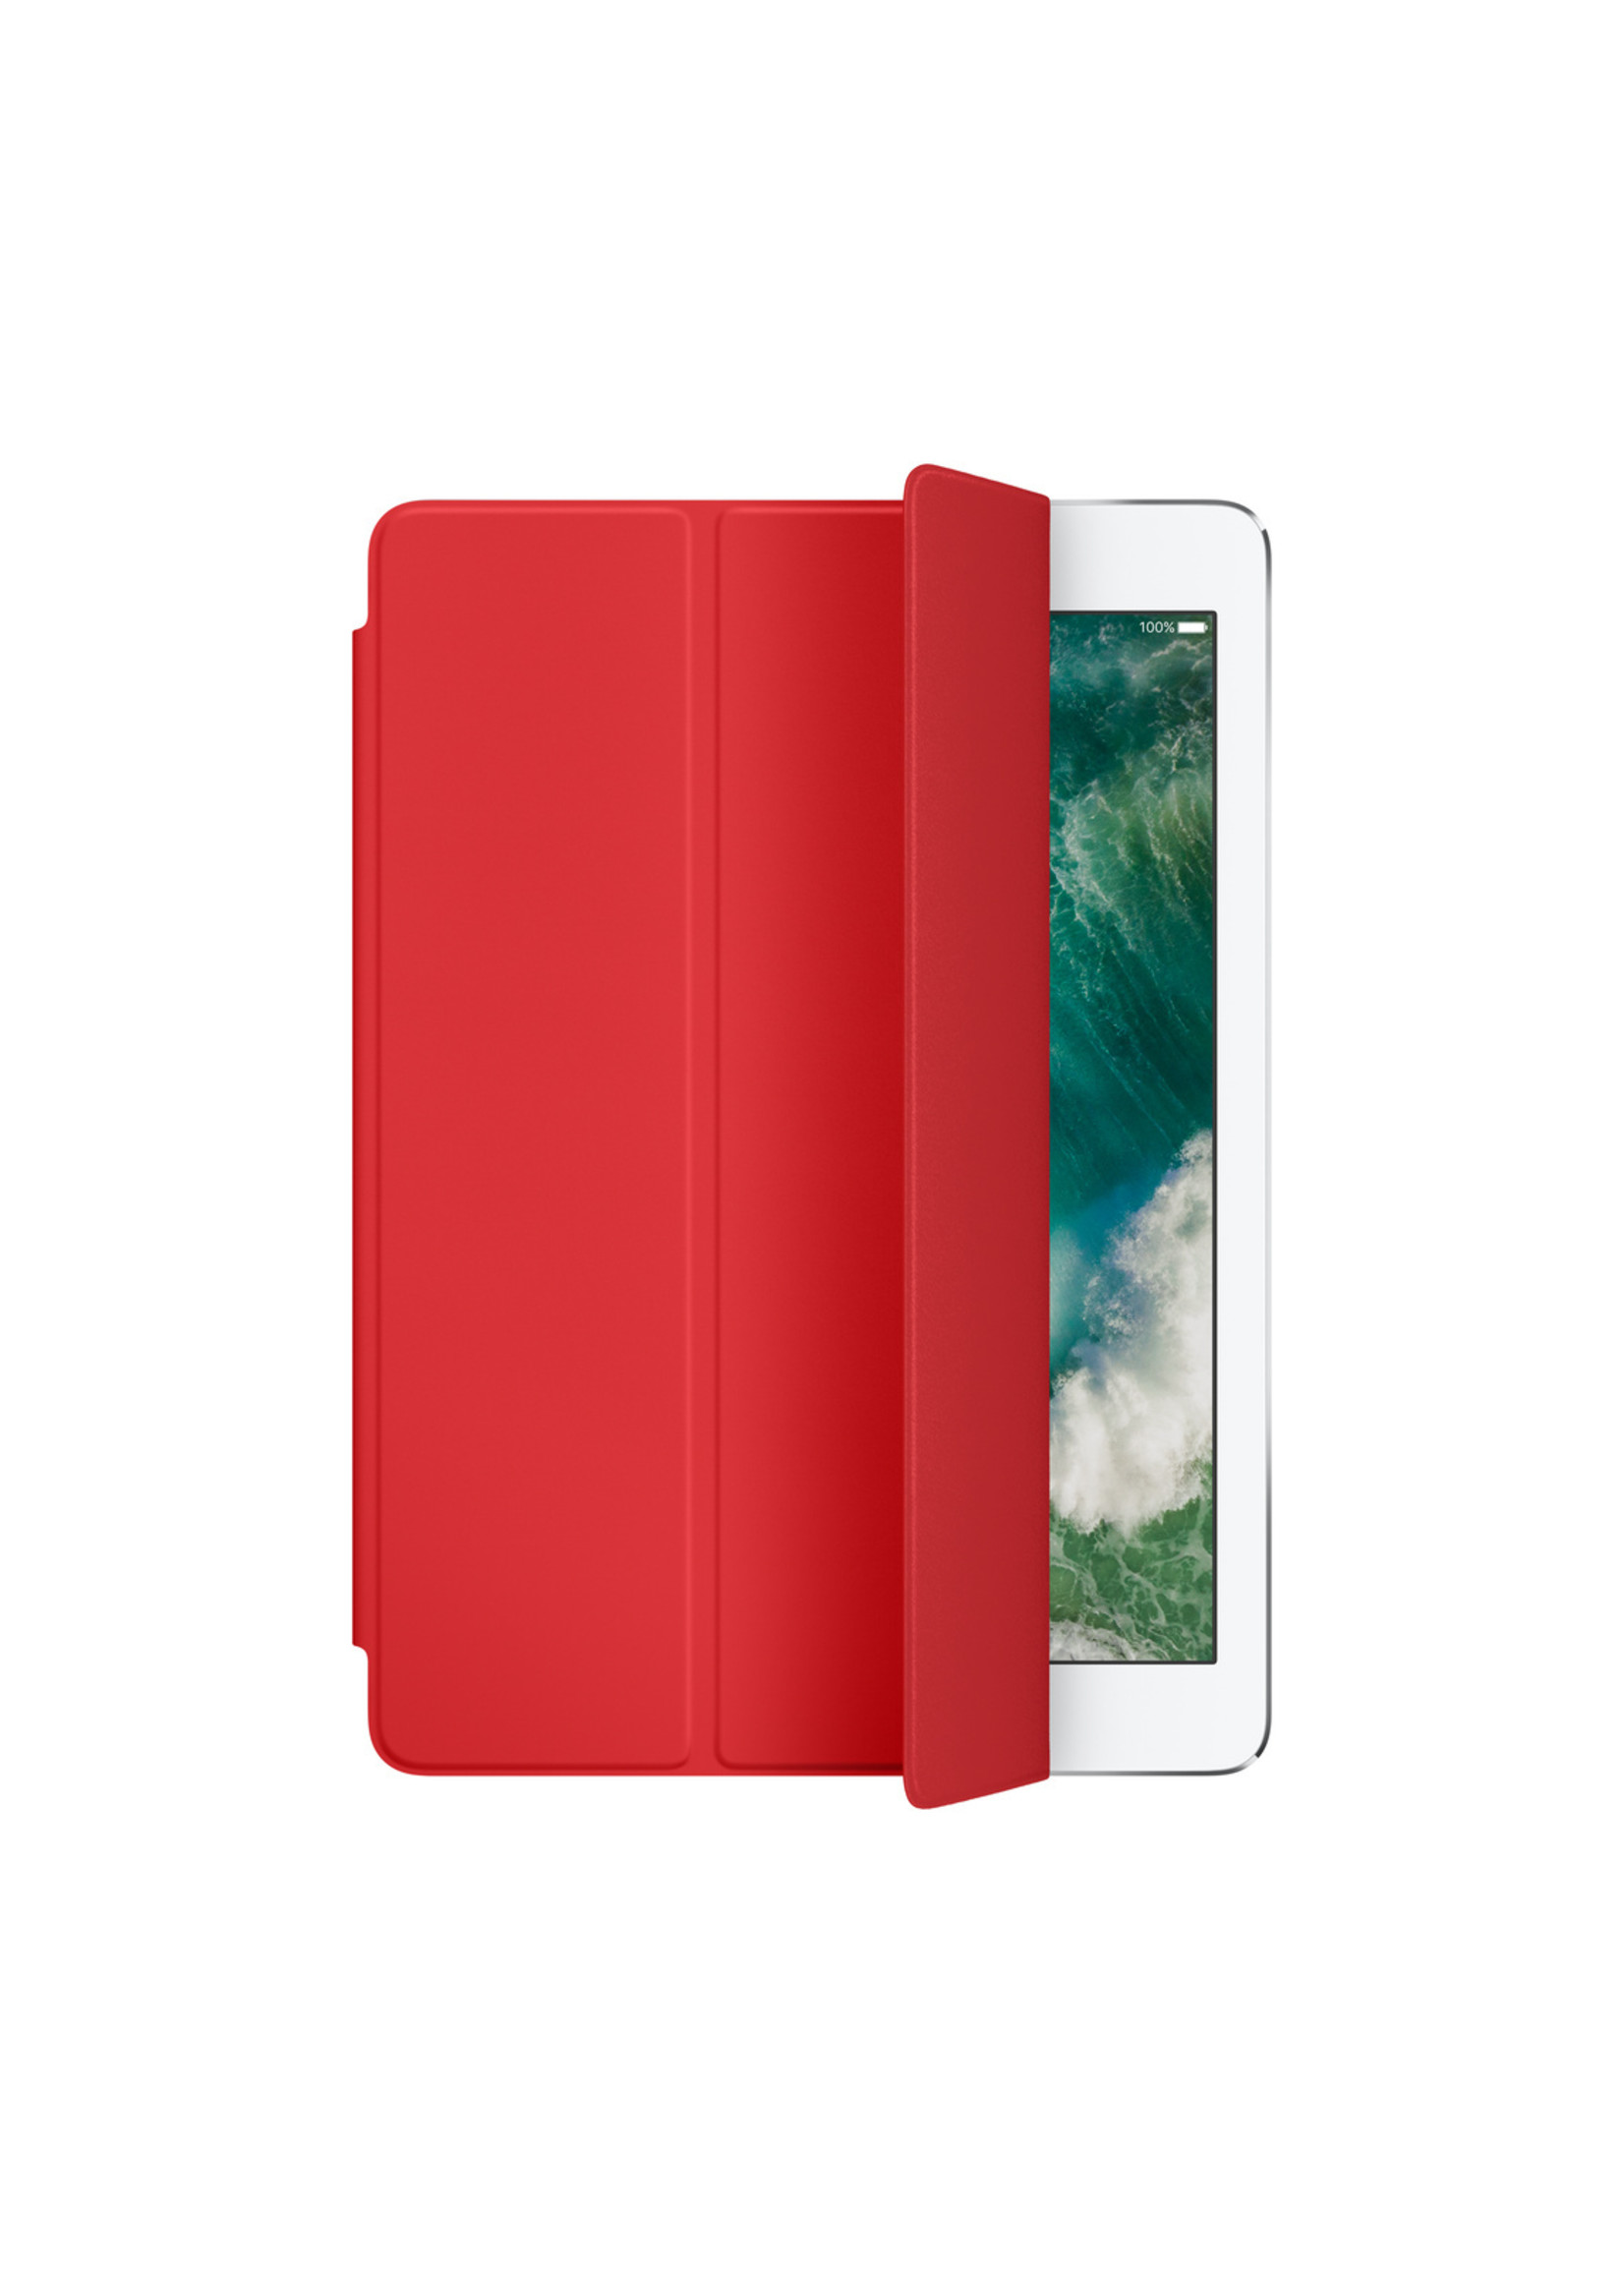 iPad 9.7-inch Smart Cover - (PRODUCT)RED (CLEARANCE)